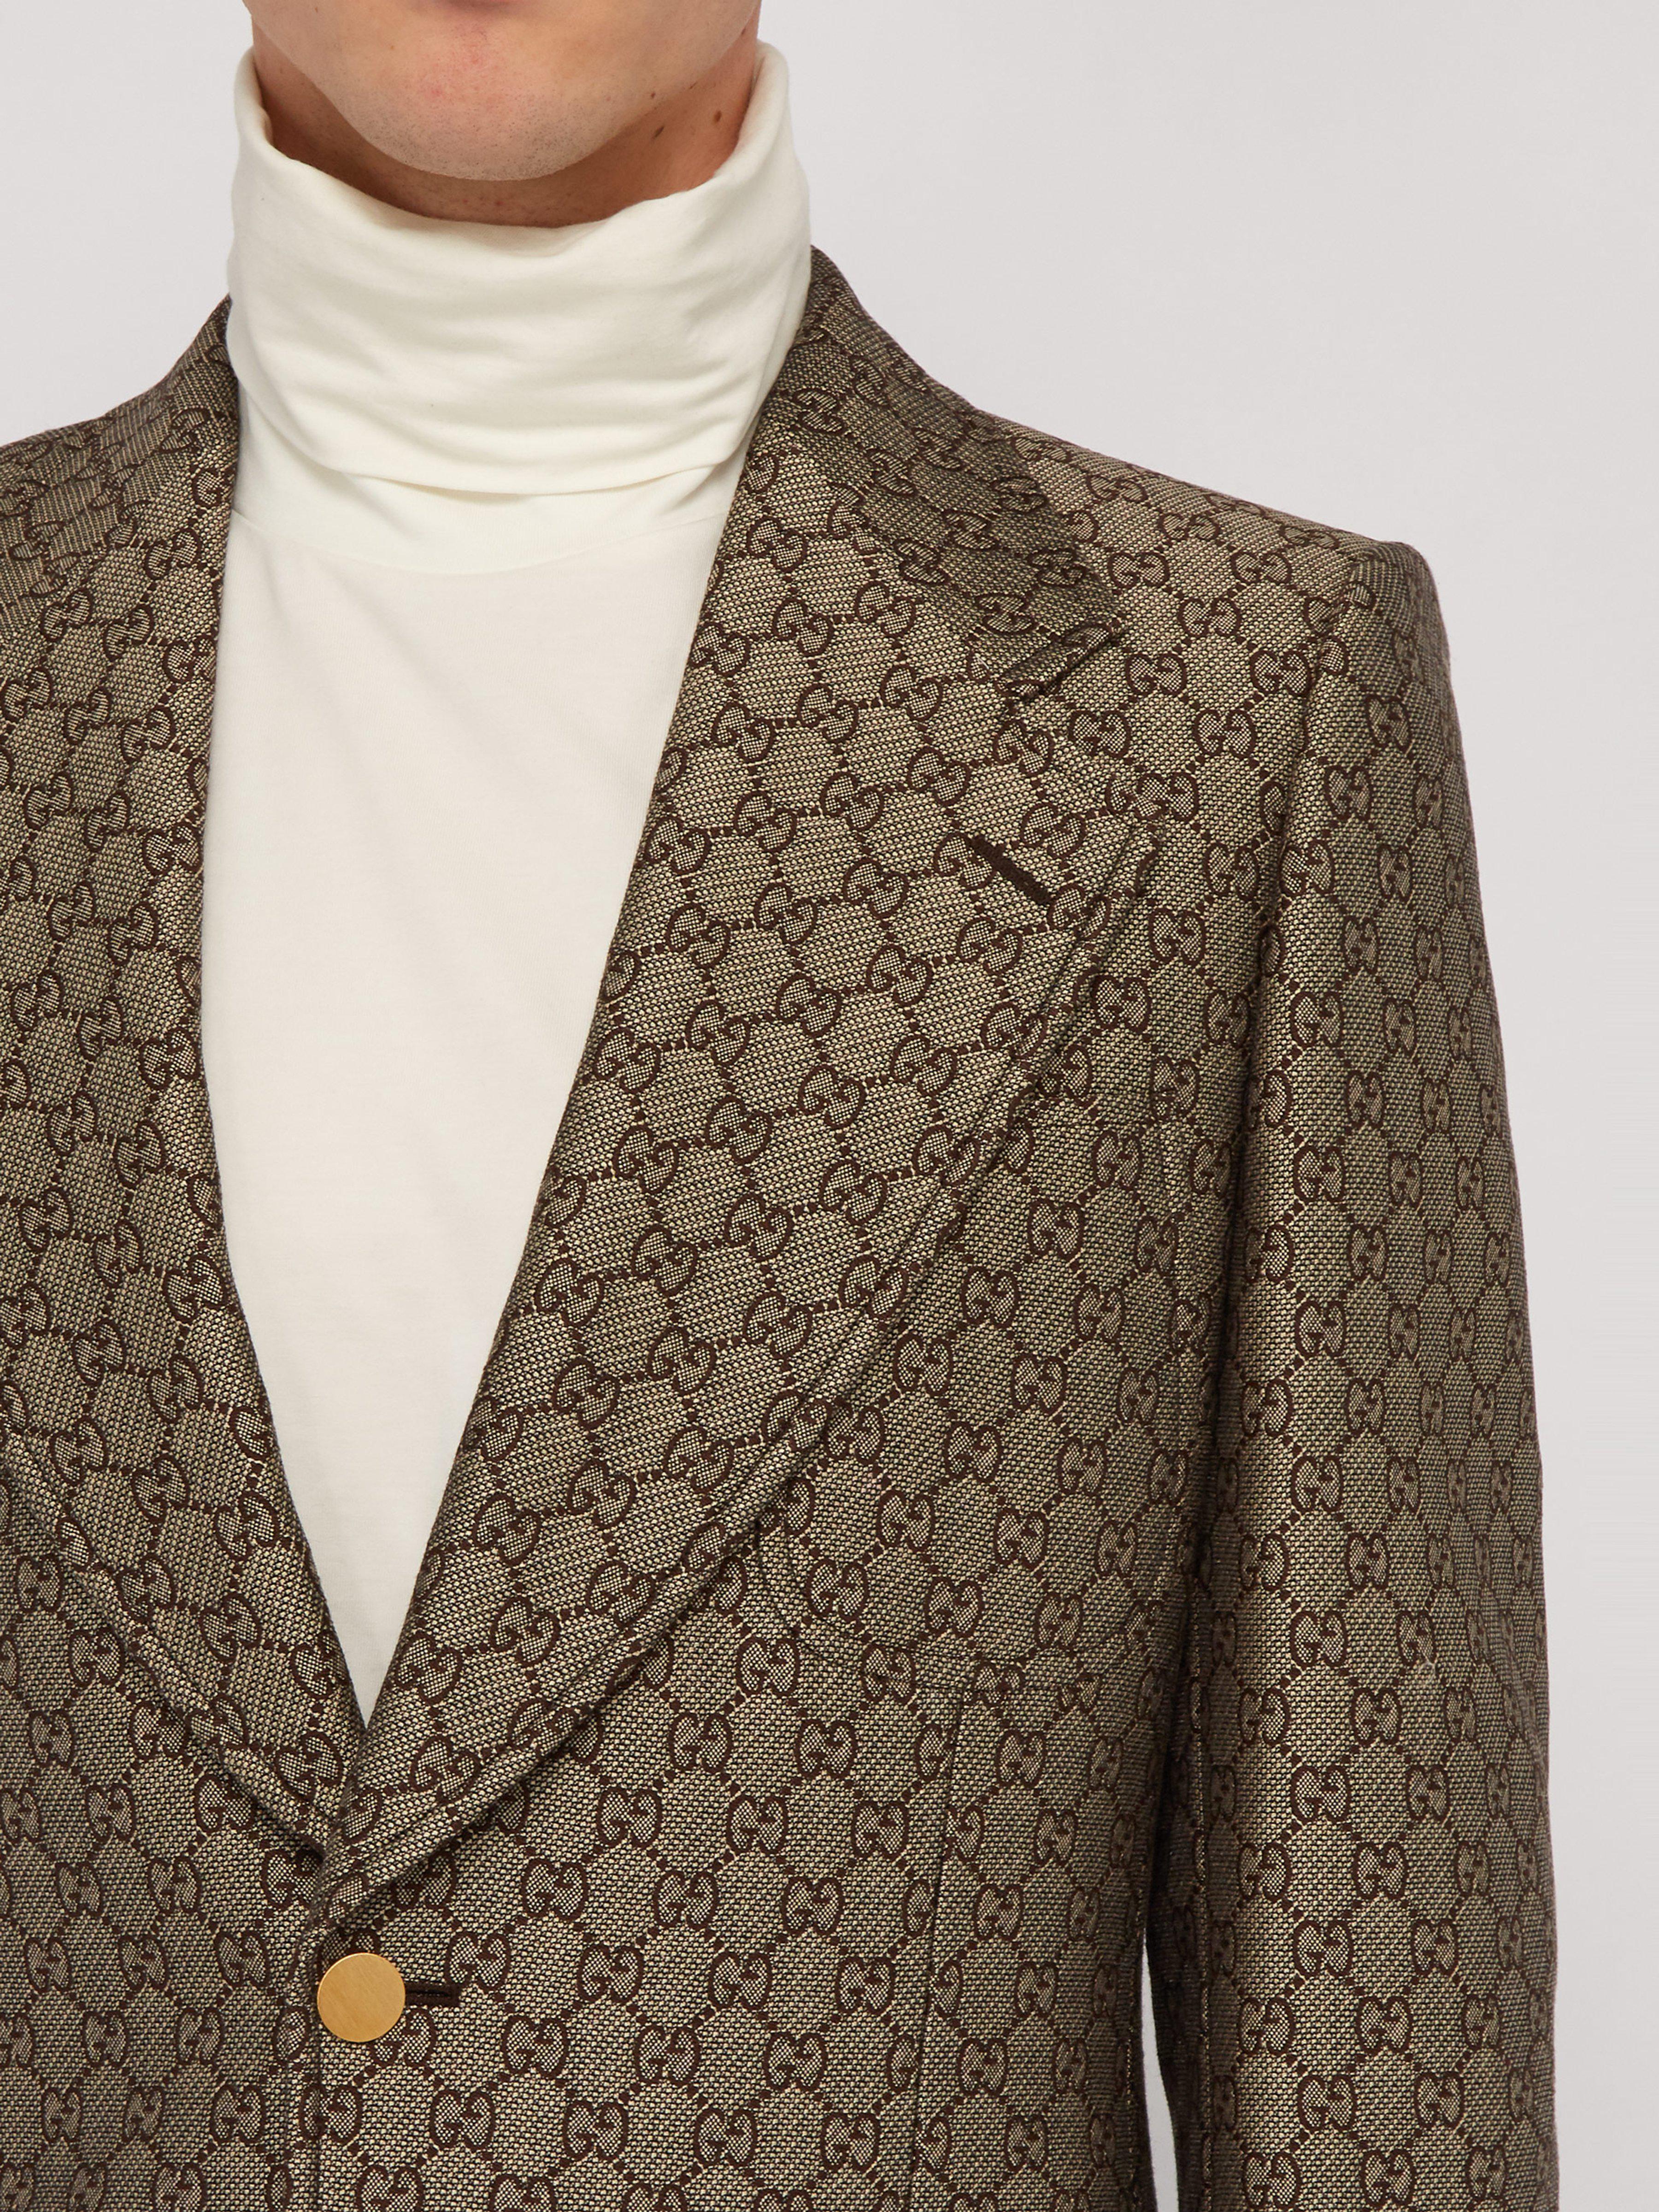 Gucci Gg Monogram Single Breasted Suit Jacket in Natural for Men | Lyst UK